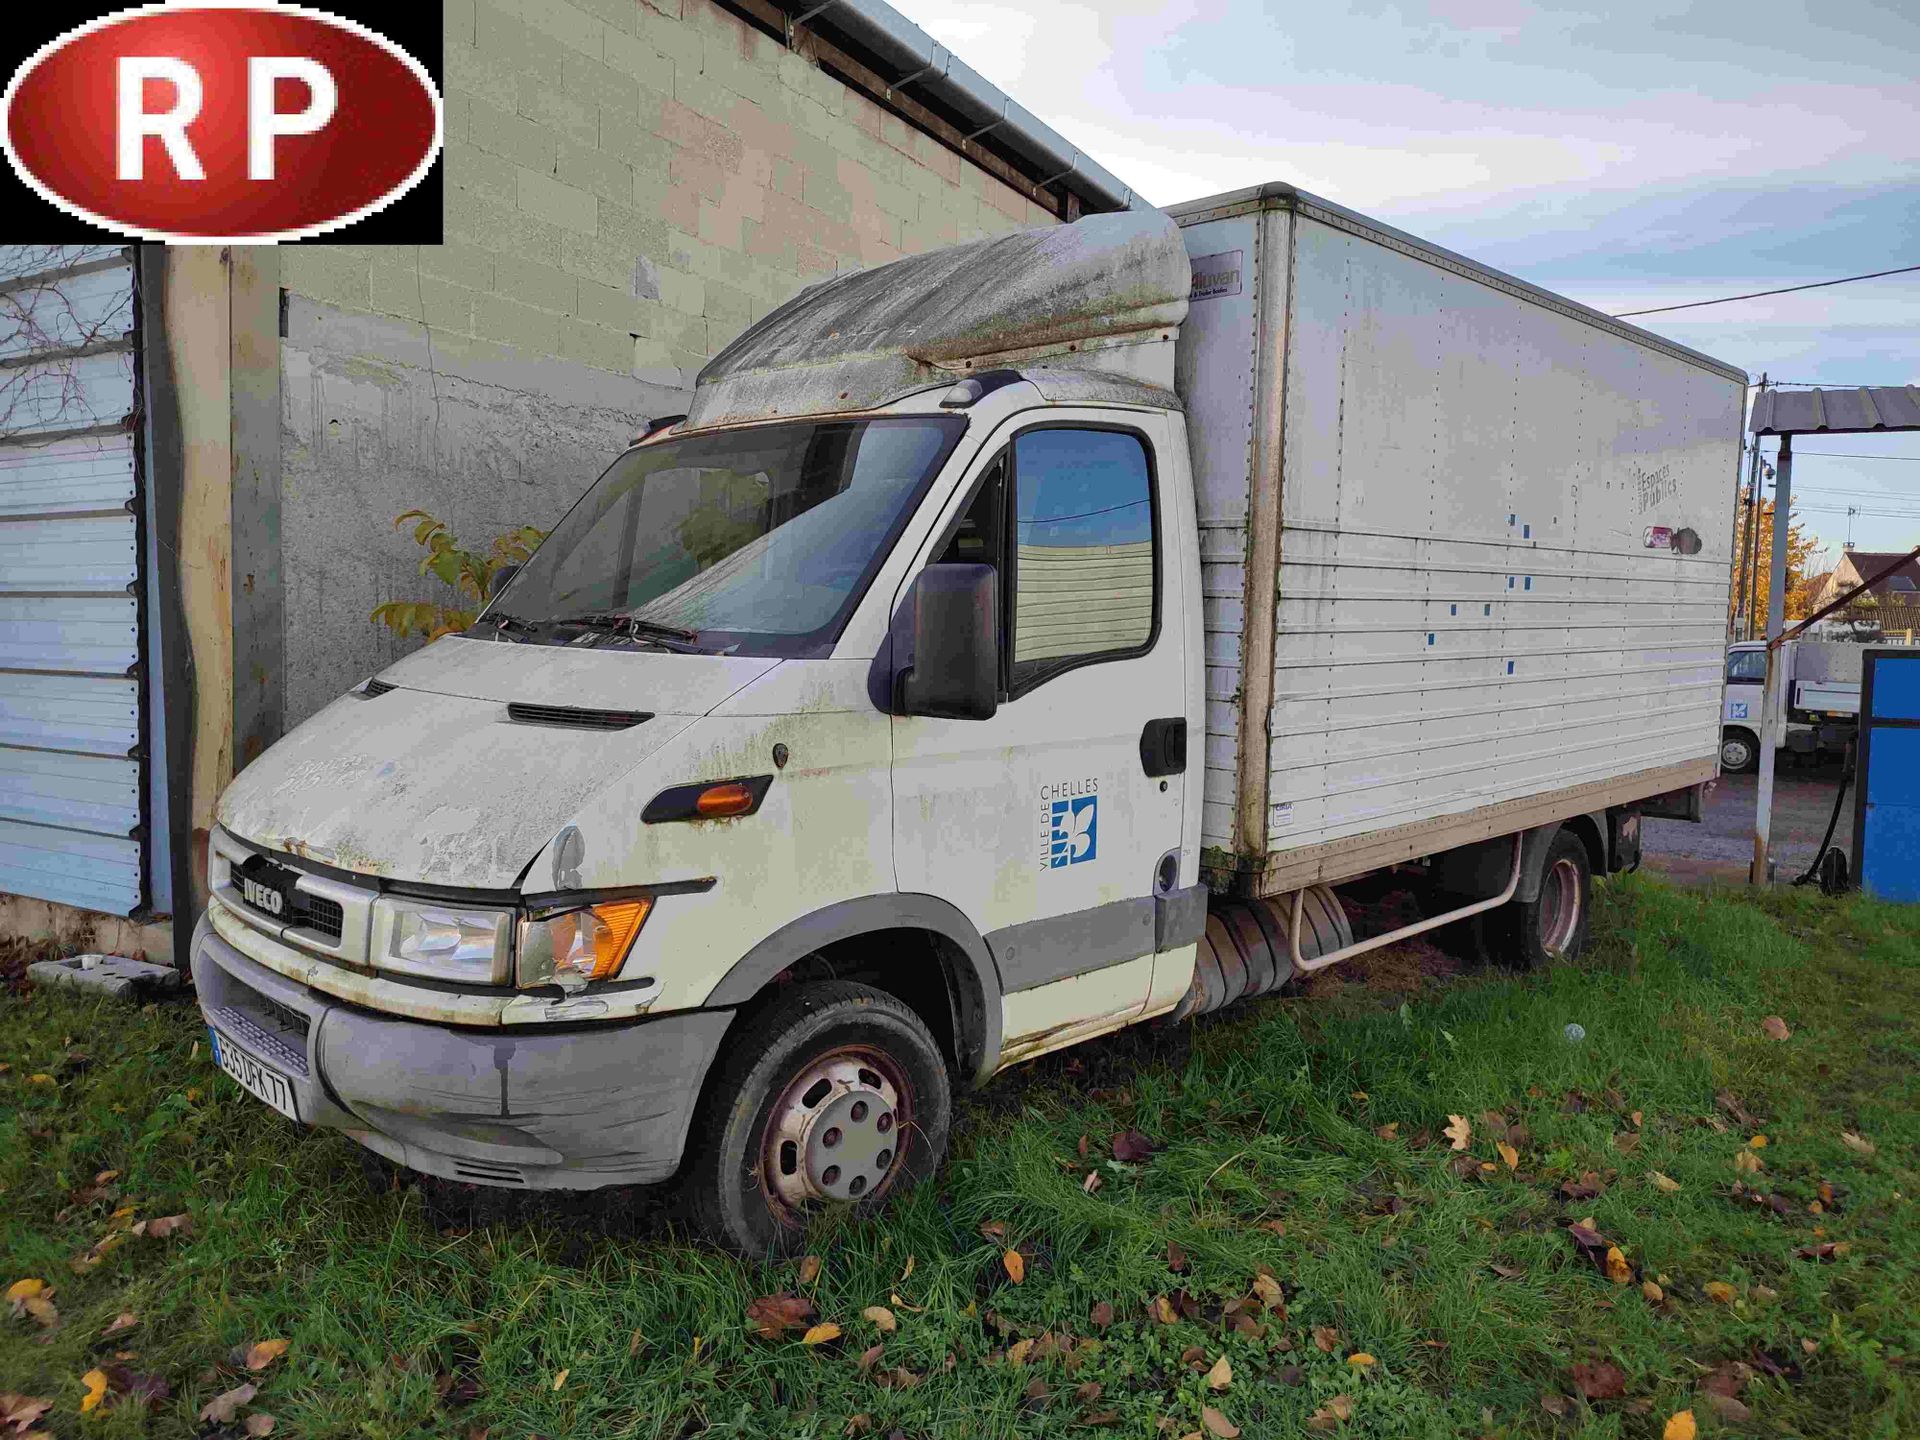 Null [RP] Utilitaire IVECO DAILY, Gazole, 3 places, imm. 635 DFK 77, type 35J11B&hellip;